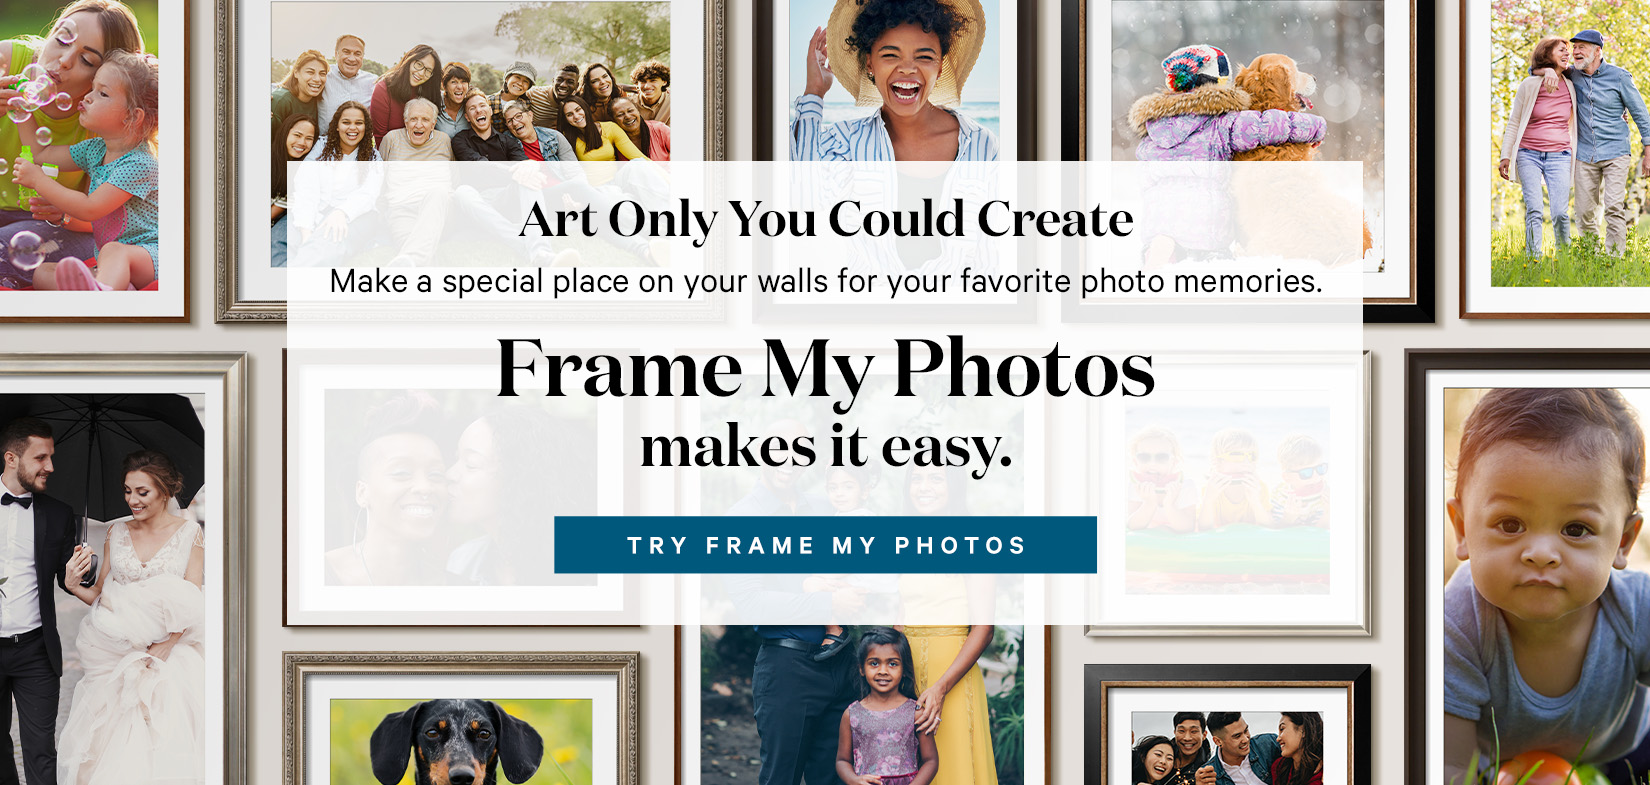 Art Only You Could Create. Make a special place on your walls for your favorite photo memories.
Frame My Photos makes it easy. TRY FRAME MY PHOTOS.>